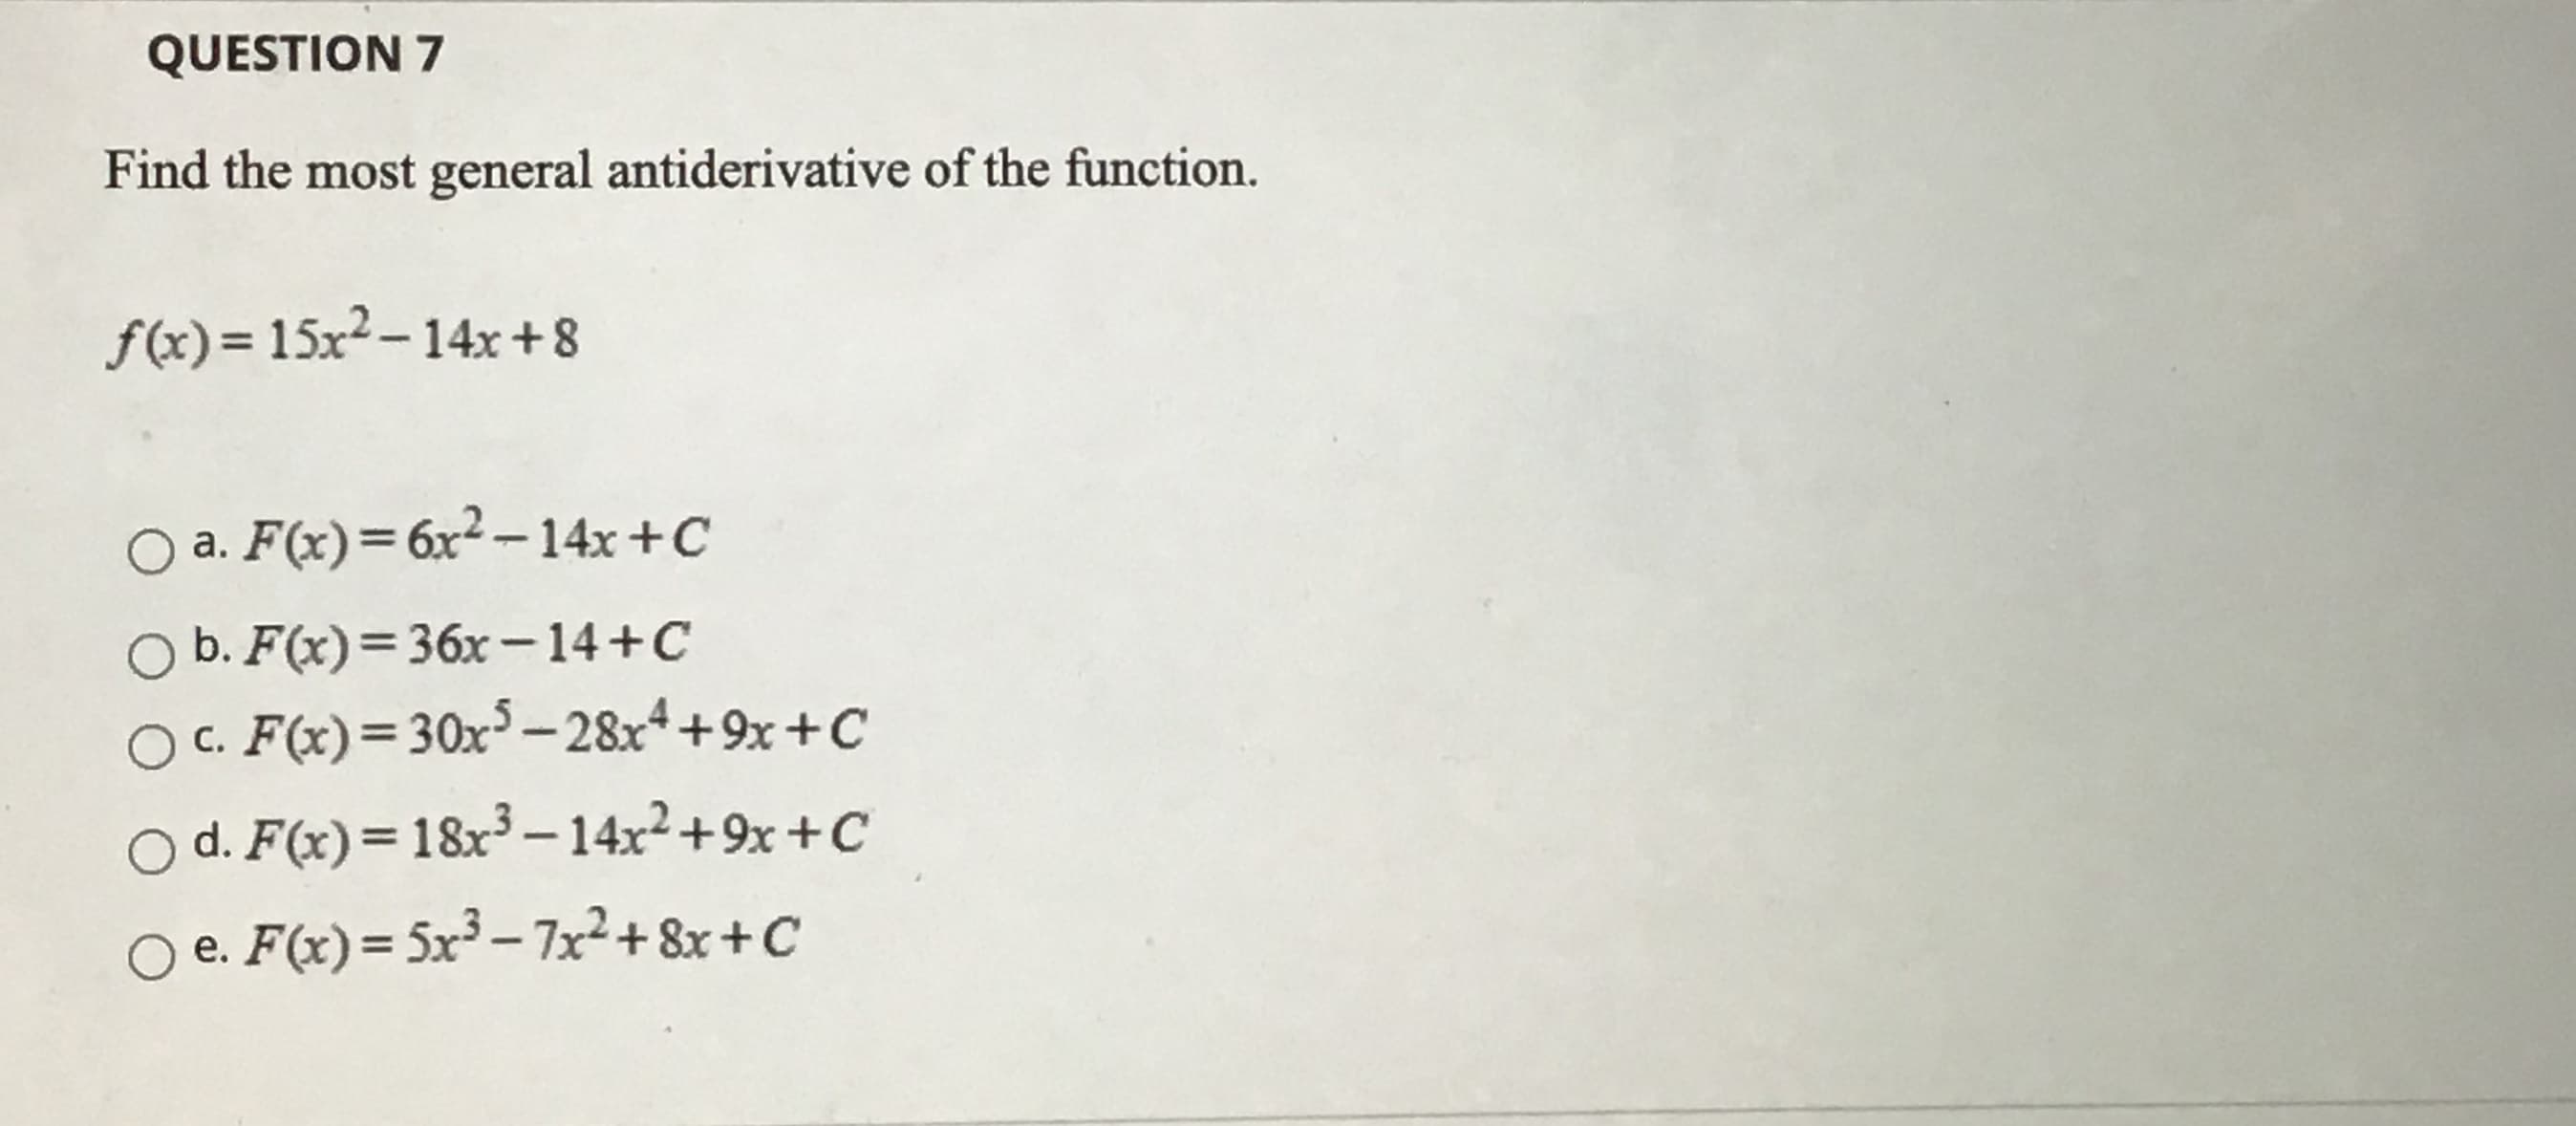 Find the most general antiderivative of the function.
f(x) = 15x²-14x+8
O a. F(x)=6x²– 14x +C
b. F(x)=36x-14+C
O . F(x)=30x³ – 28x*+9x +C
O d. F(x)=18x³ – 14x²+9x +C
O e. F(x)= Sx³ – 7x²+ 8x +C
